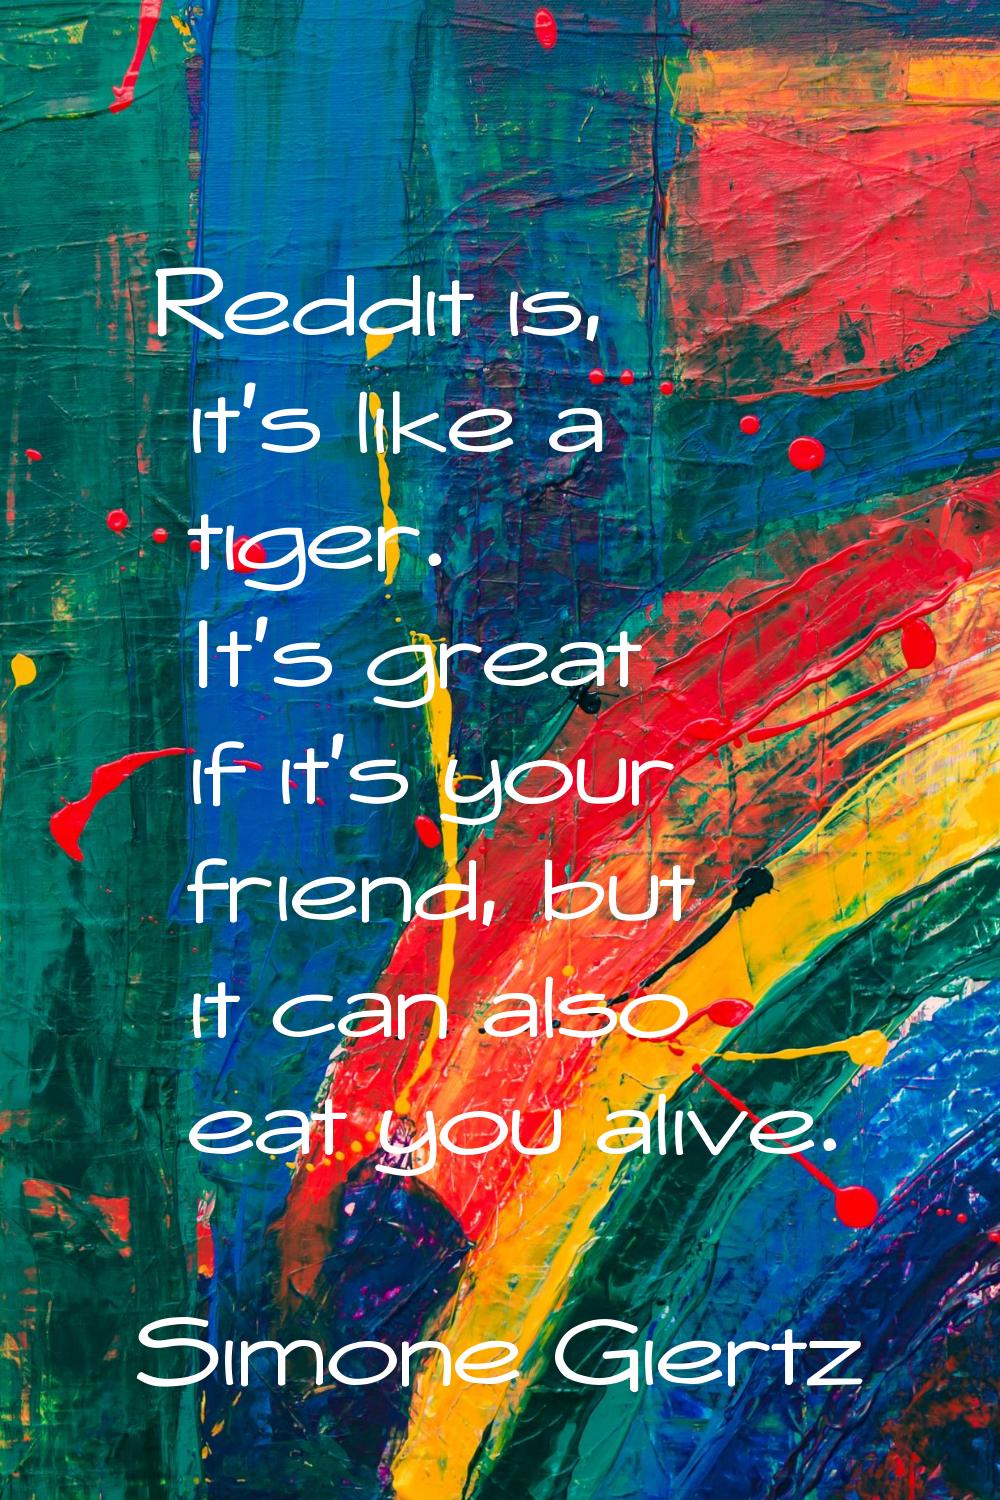 Reddit is, it's like a tiger. It's great if it's your friend, but it can also eat you alive.